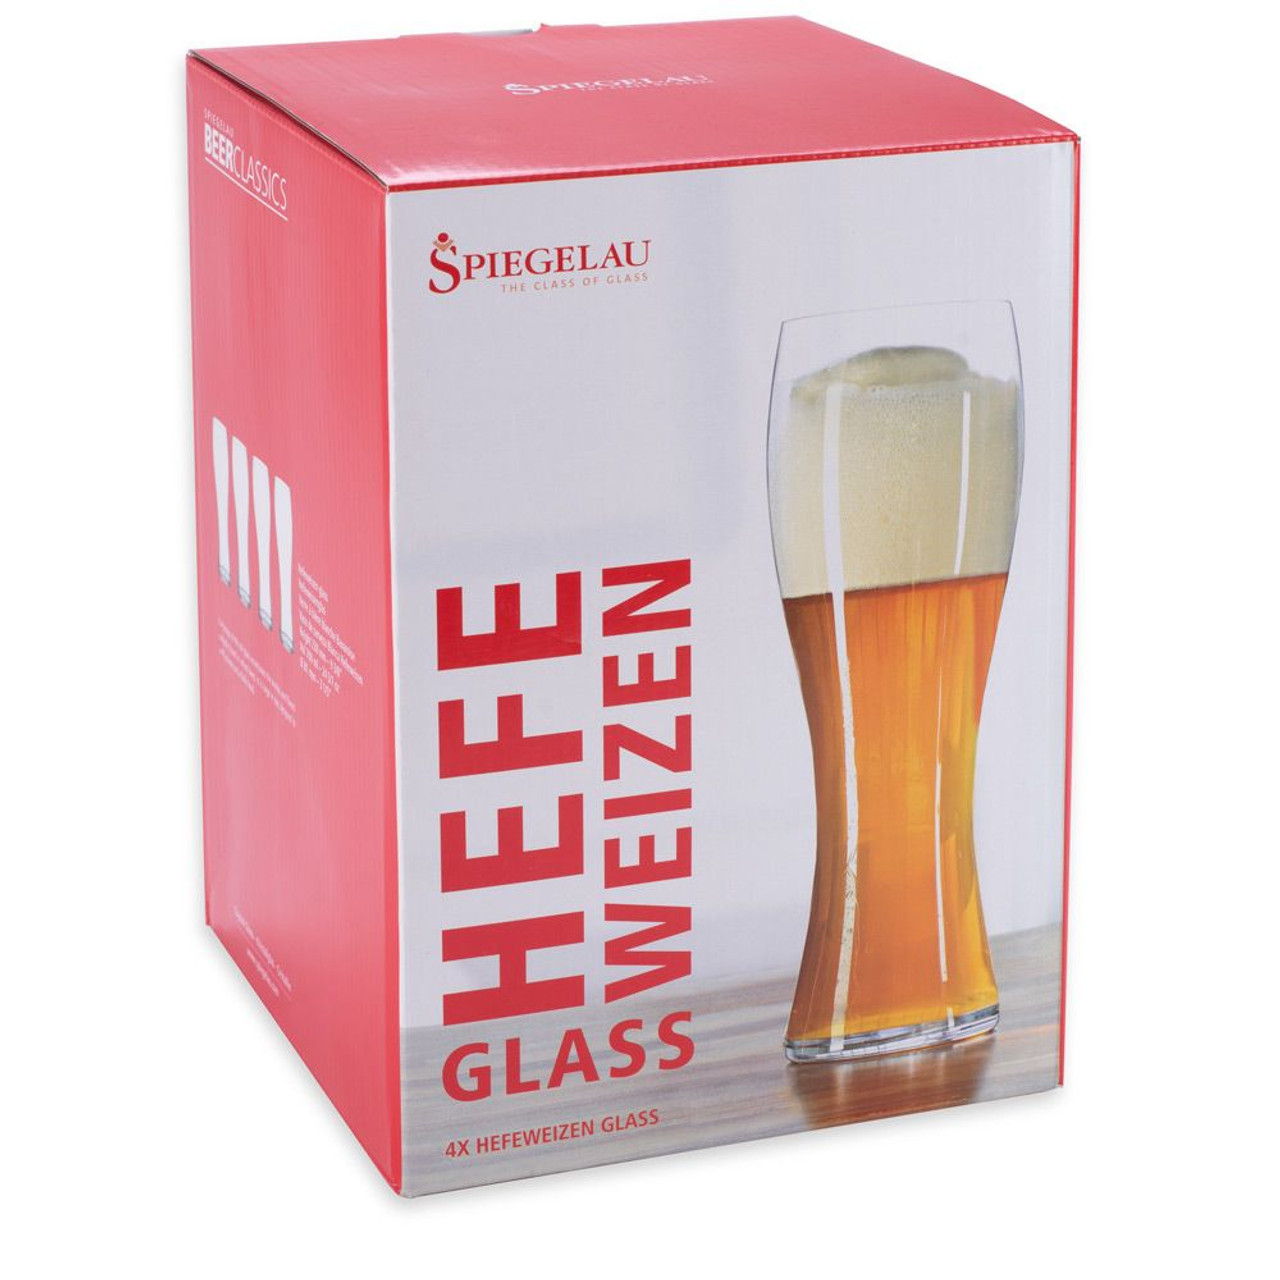 https://cdn11.bigcommerce.com/s-cznxq08r7/images/stencil/1280x1280/products/801/1702/4991974_spiegelau-crystal-hefeweizen-beer-glasses-set-of-4_13__04114.1590765258.jpg?c=1